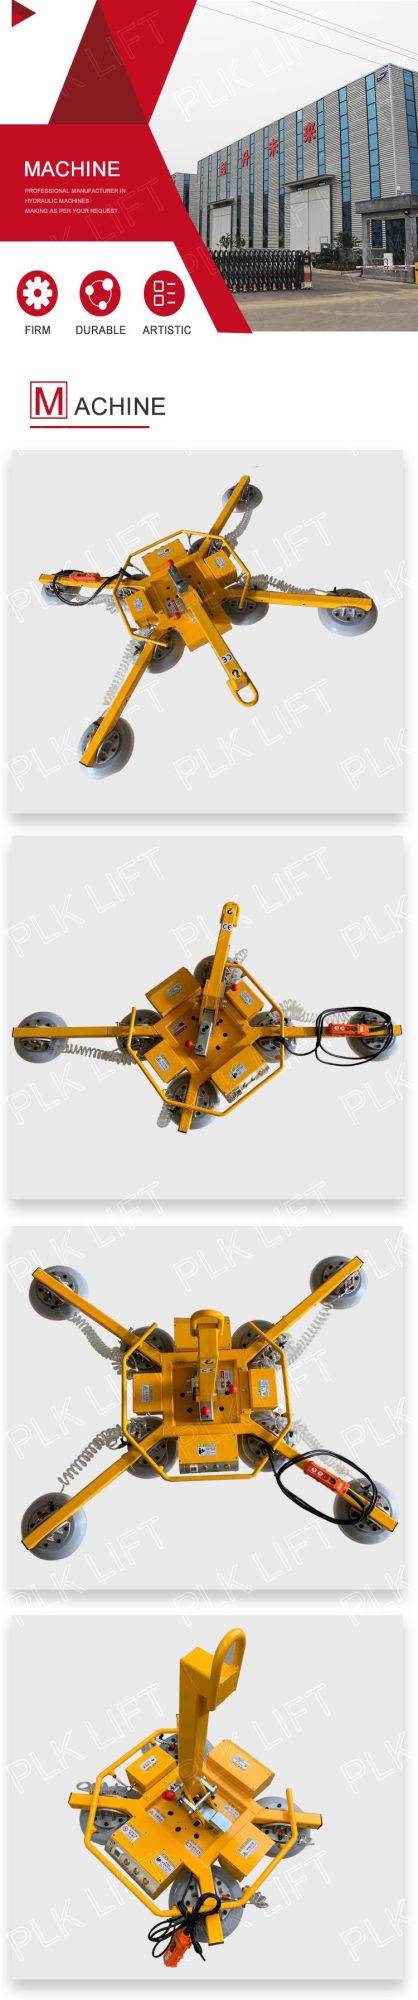 800kg 1000kg Vacuum Suction Cups Battery Powered Glass Lifter